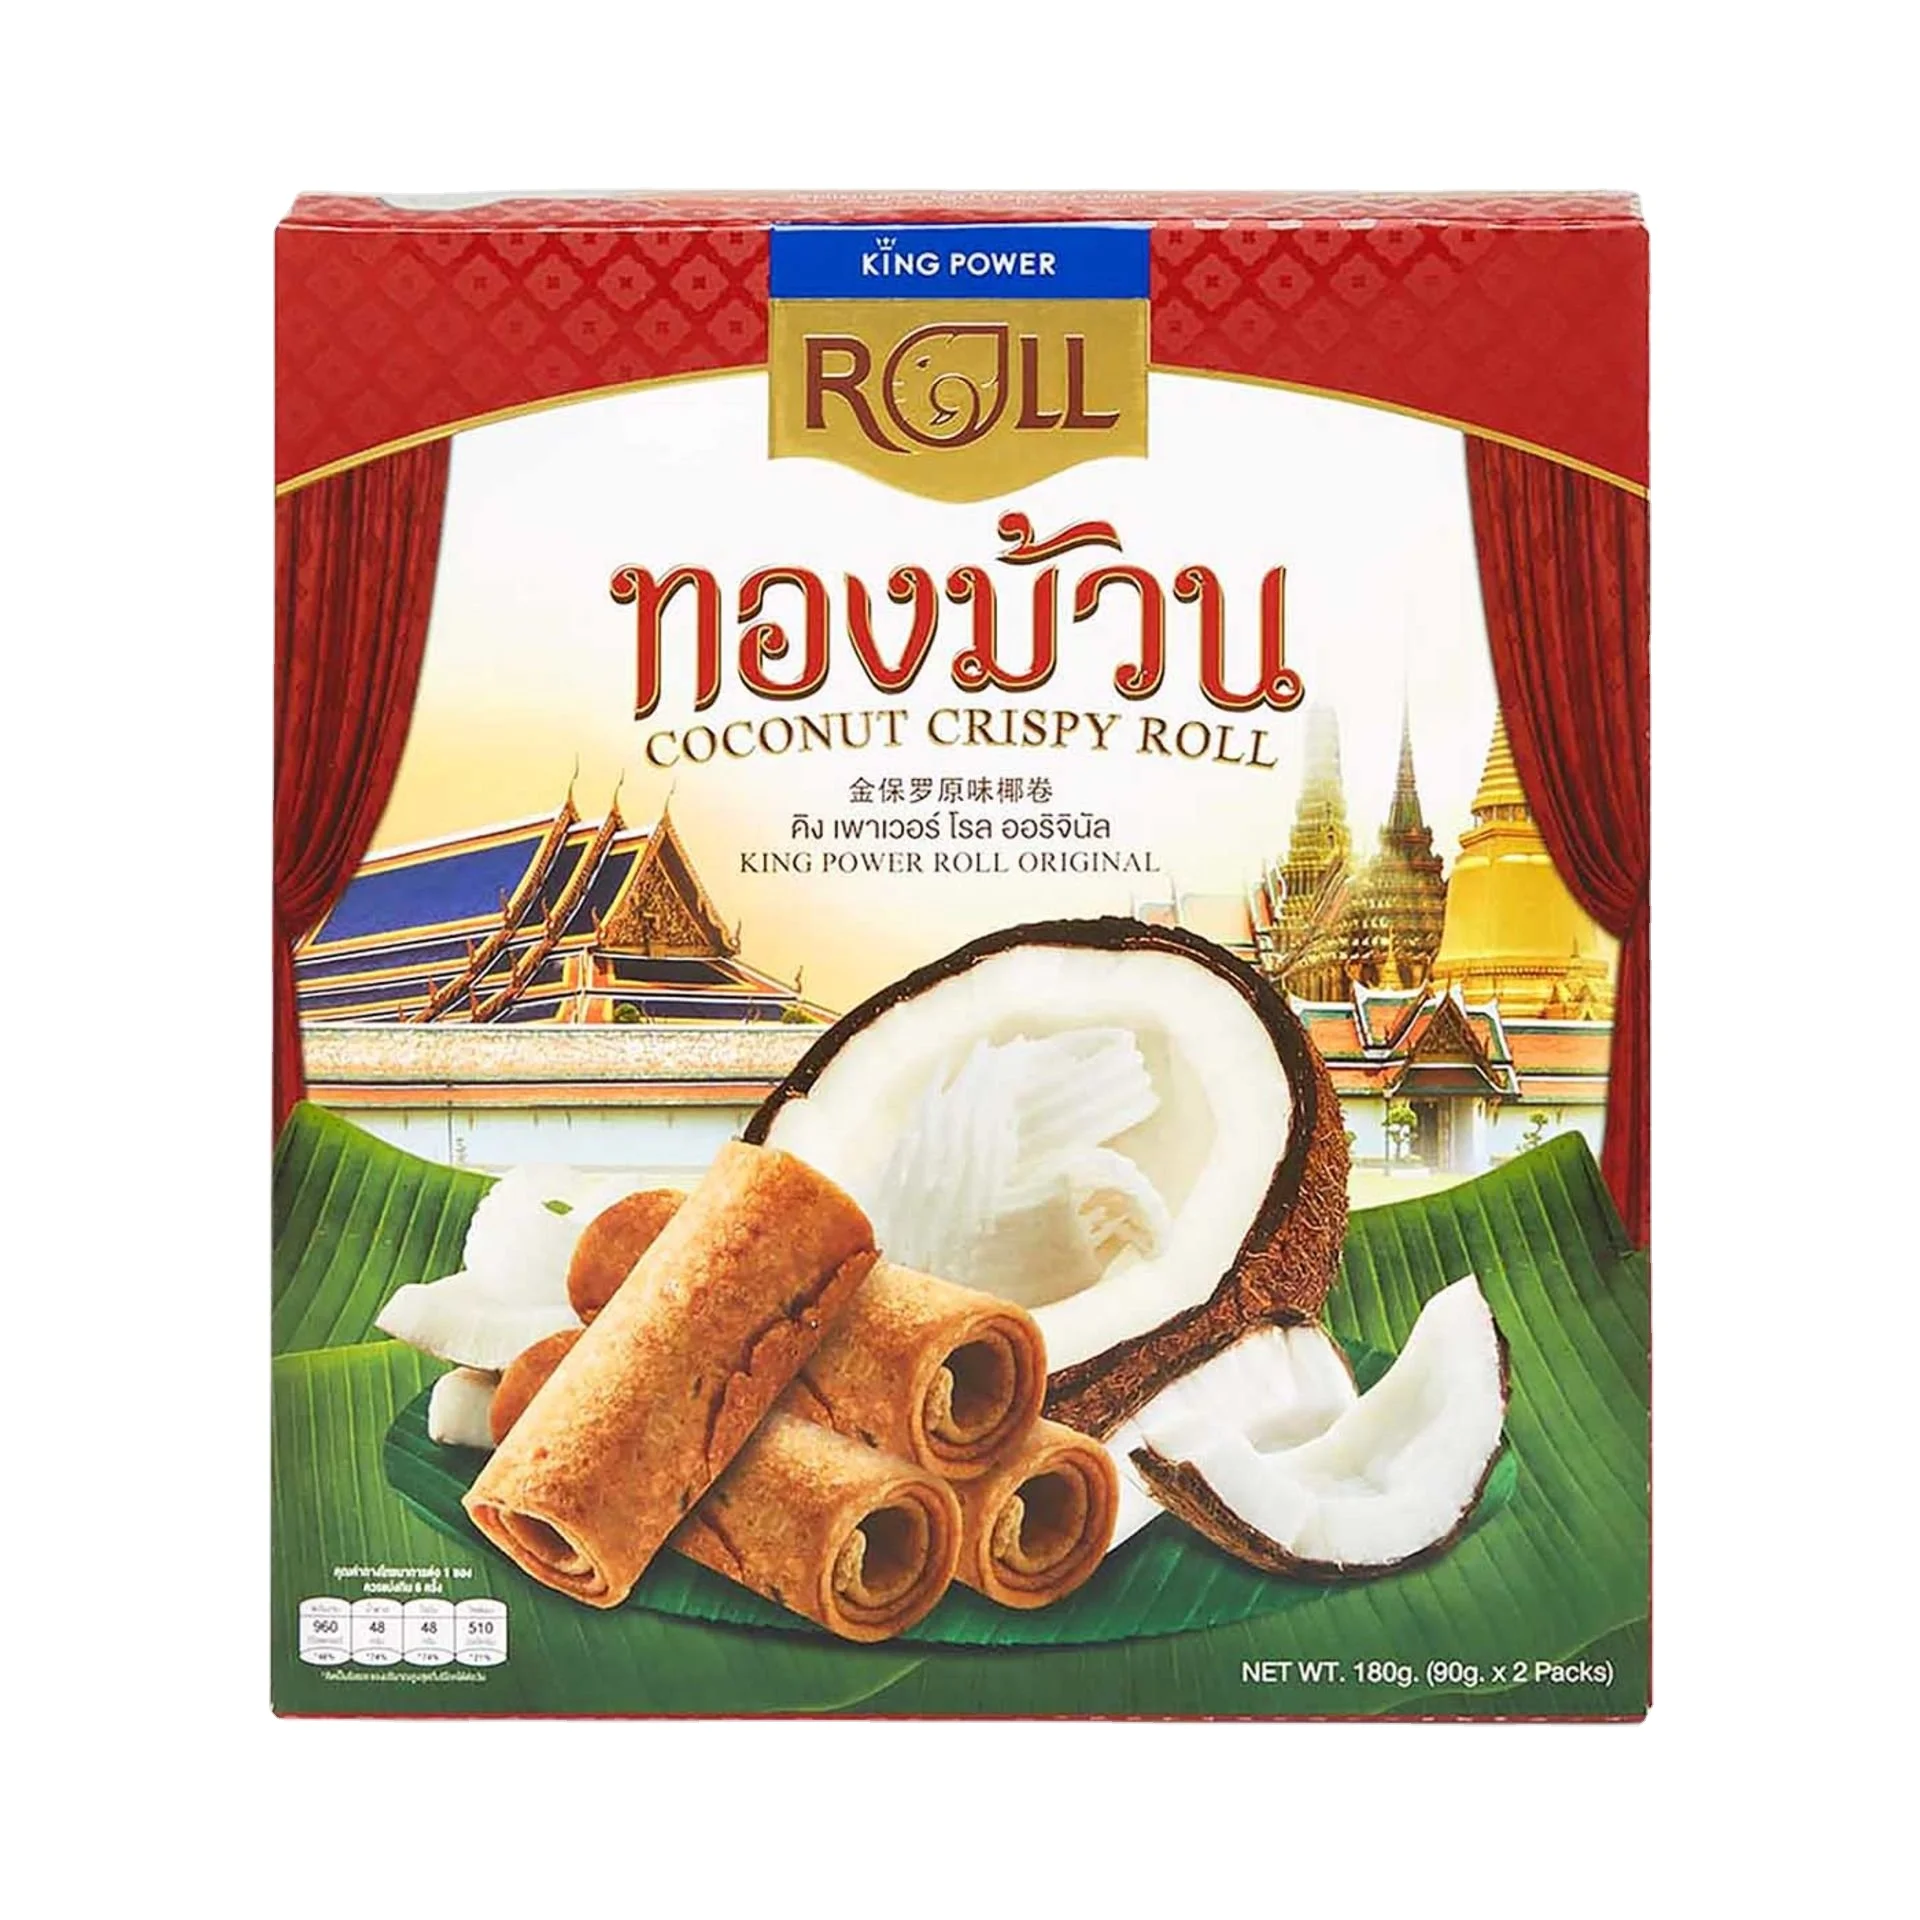 KING POWER ROLL Original   Sweet Coconut Crispy Rolls THAI SNACK FOR EVERYONE TO ENJOY WITH DELICIOUS TASTE (10000006627296)